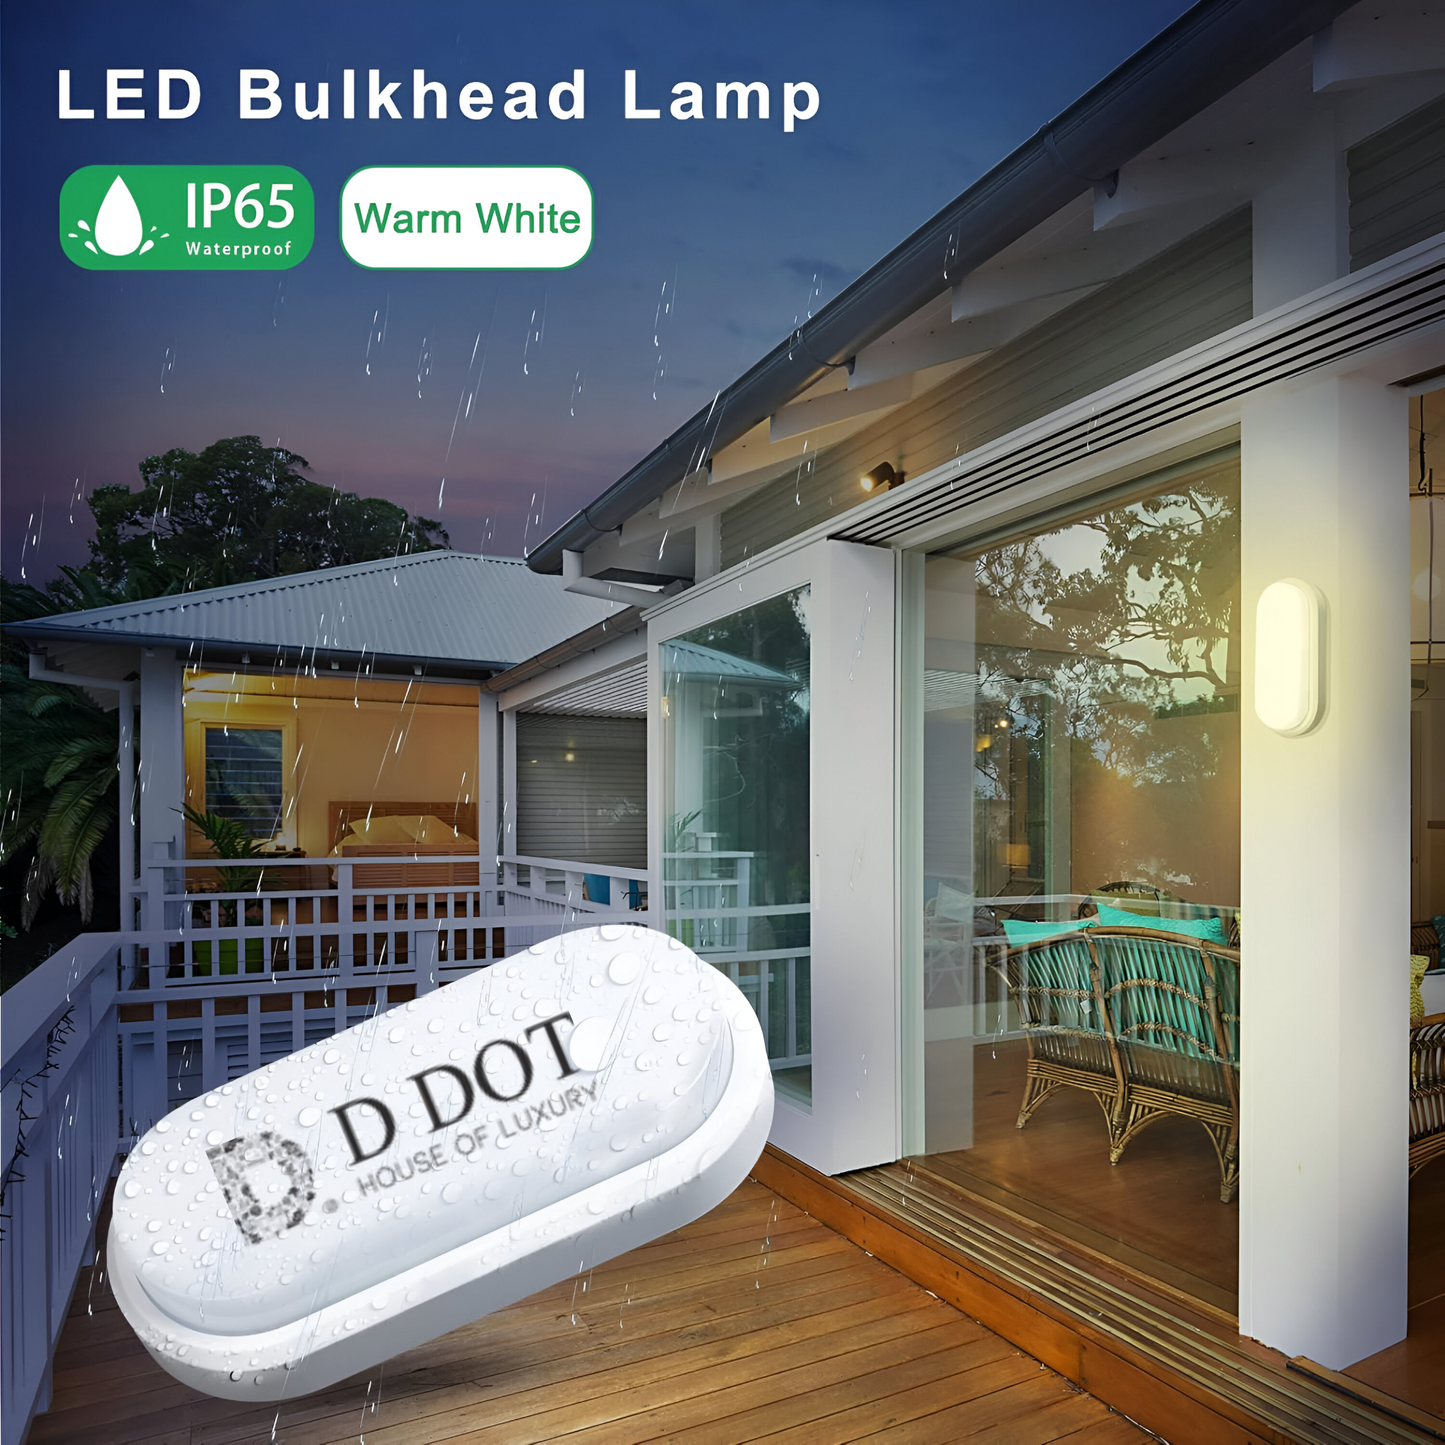 "20W Oval Bulkhead Lamp Fixture - 3000K Warm Diffused Light | Waterproof for Gardens, Sheds, Porches | Shop Now"